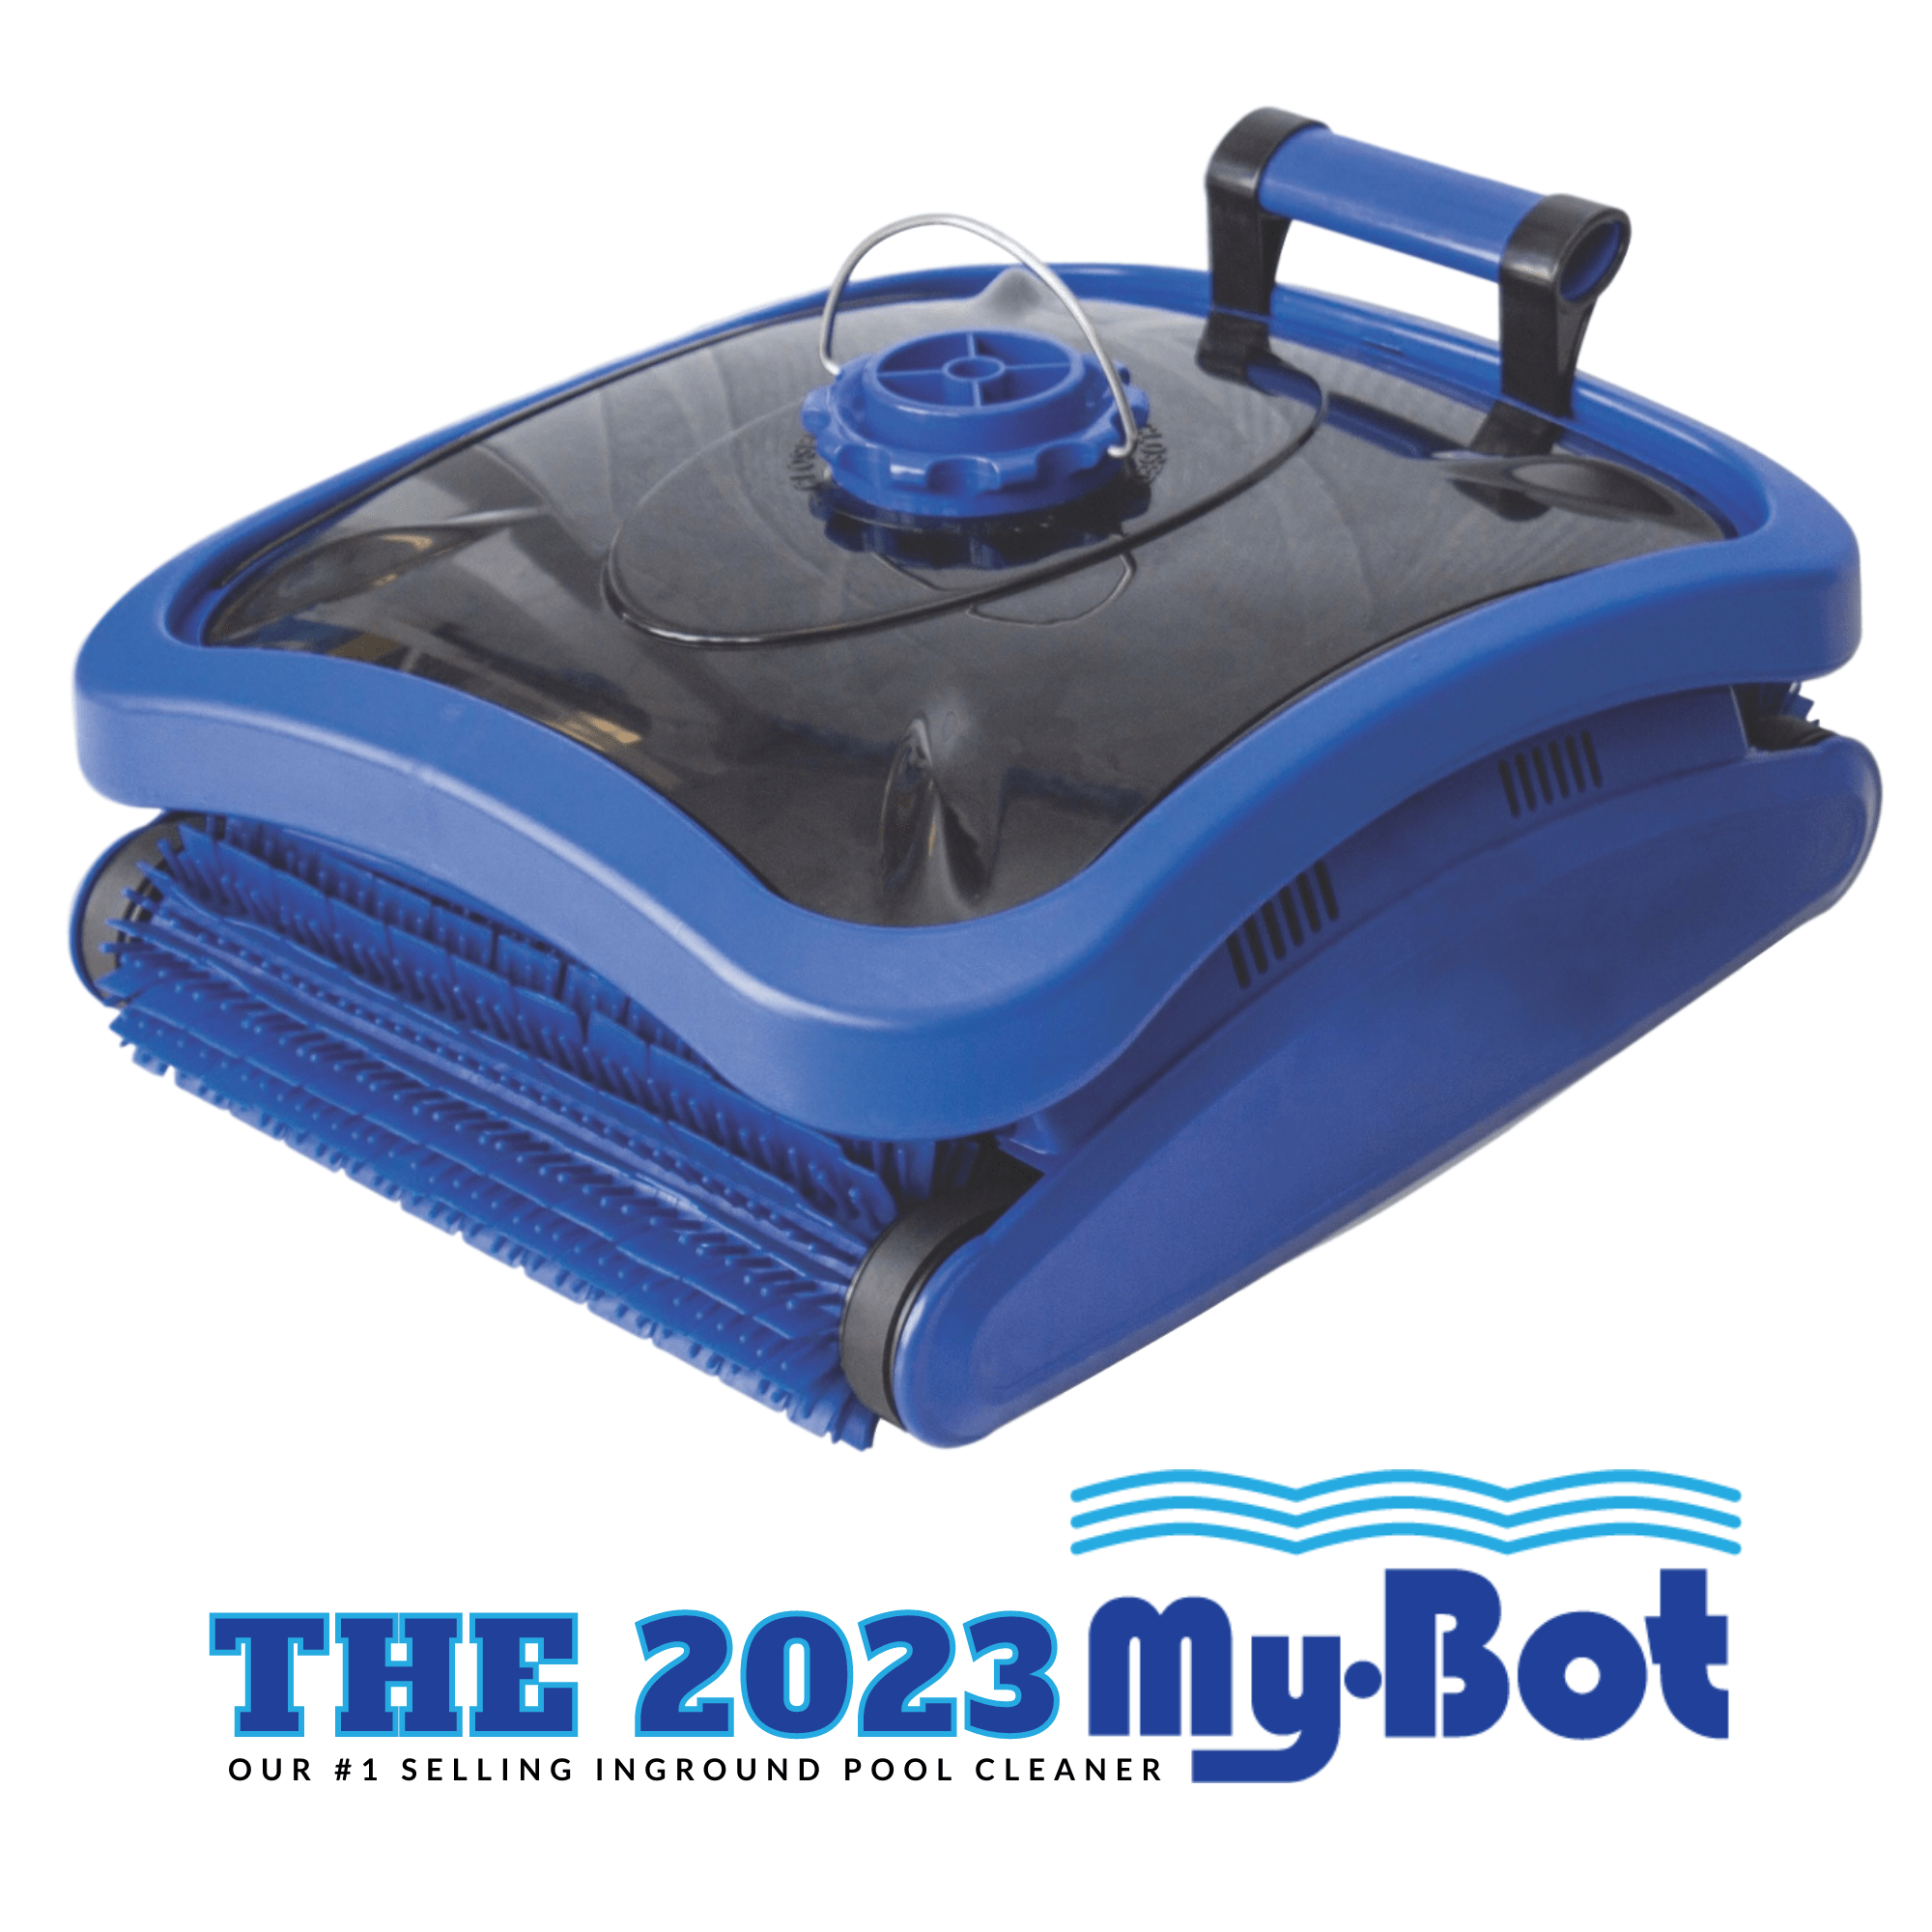 Check Out The MyBot Pool Cleaner